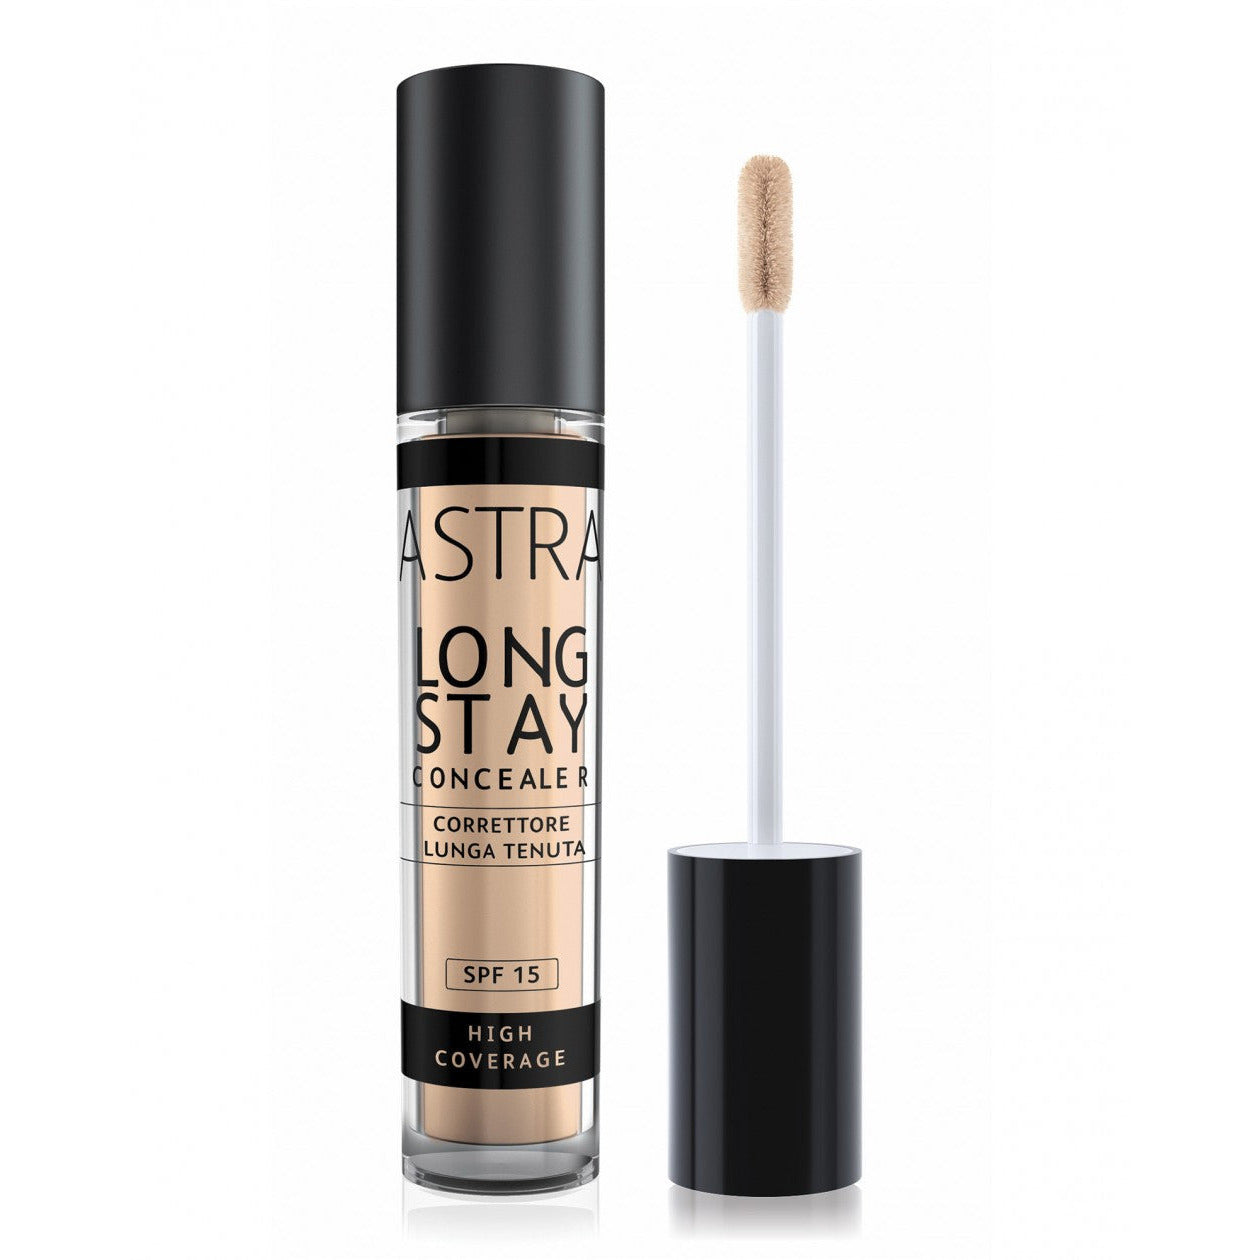 Astra Long Stay Concealer Available in 4 Colors